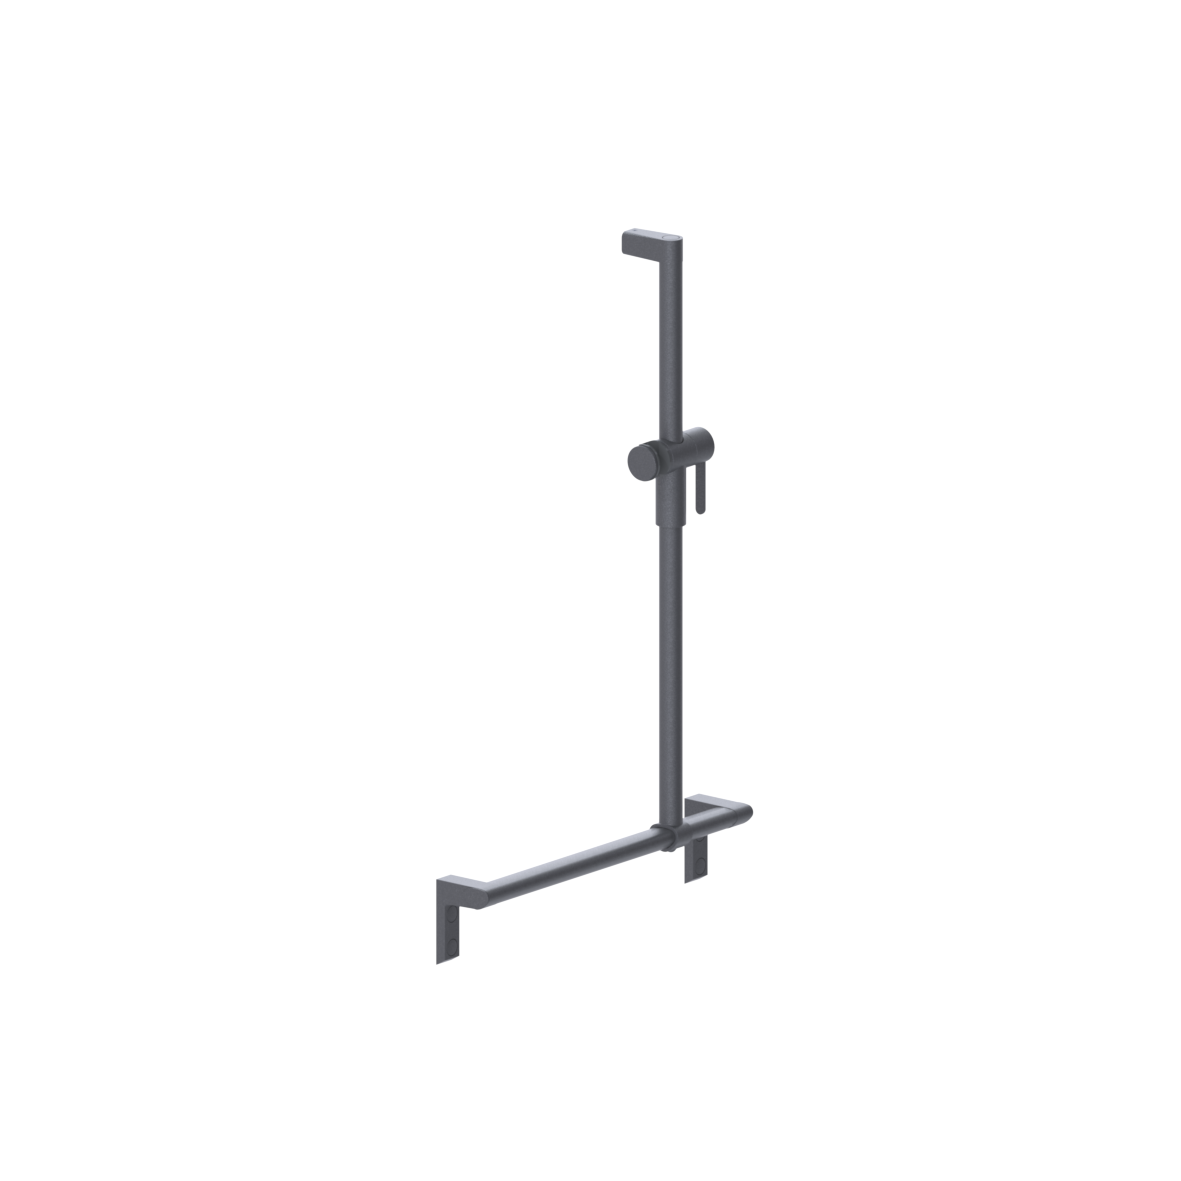 Cavere Care Shower handrail, with movable shower handrail, left and right, 500 x 750 mm, Cavere Metallic anthracite